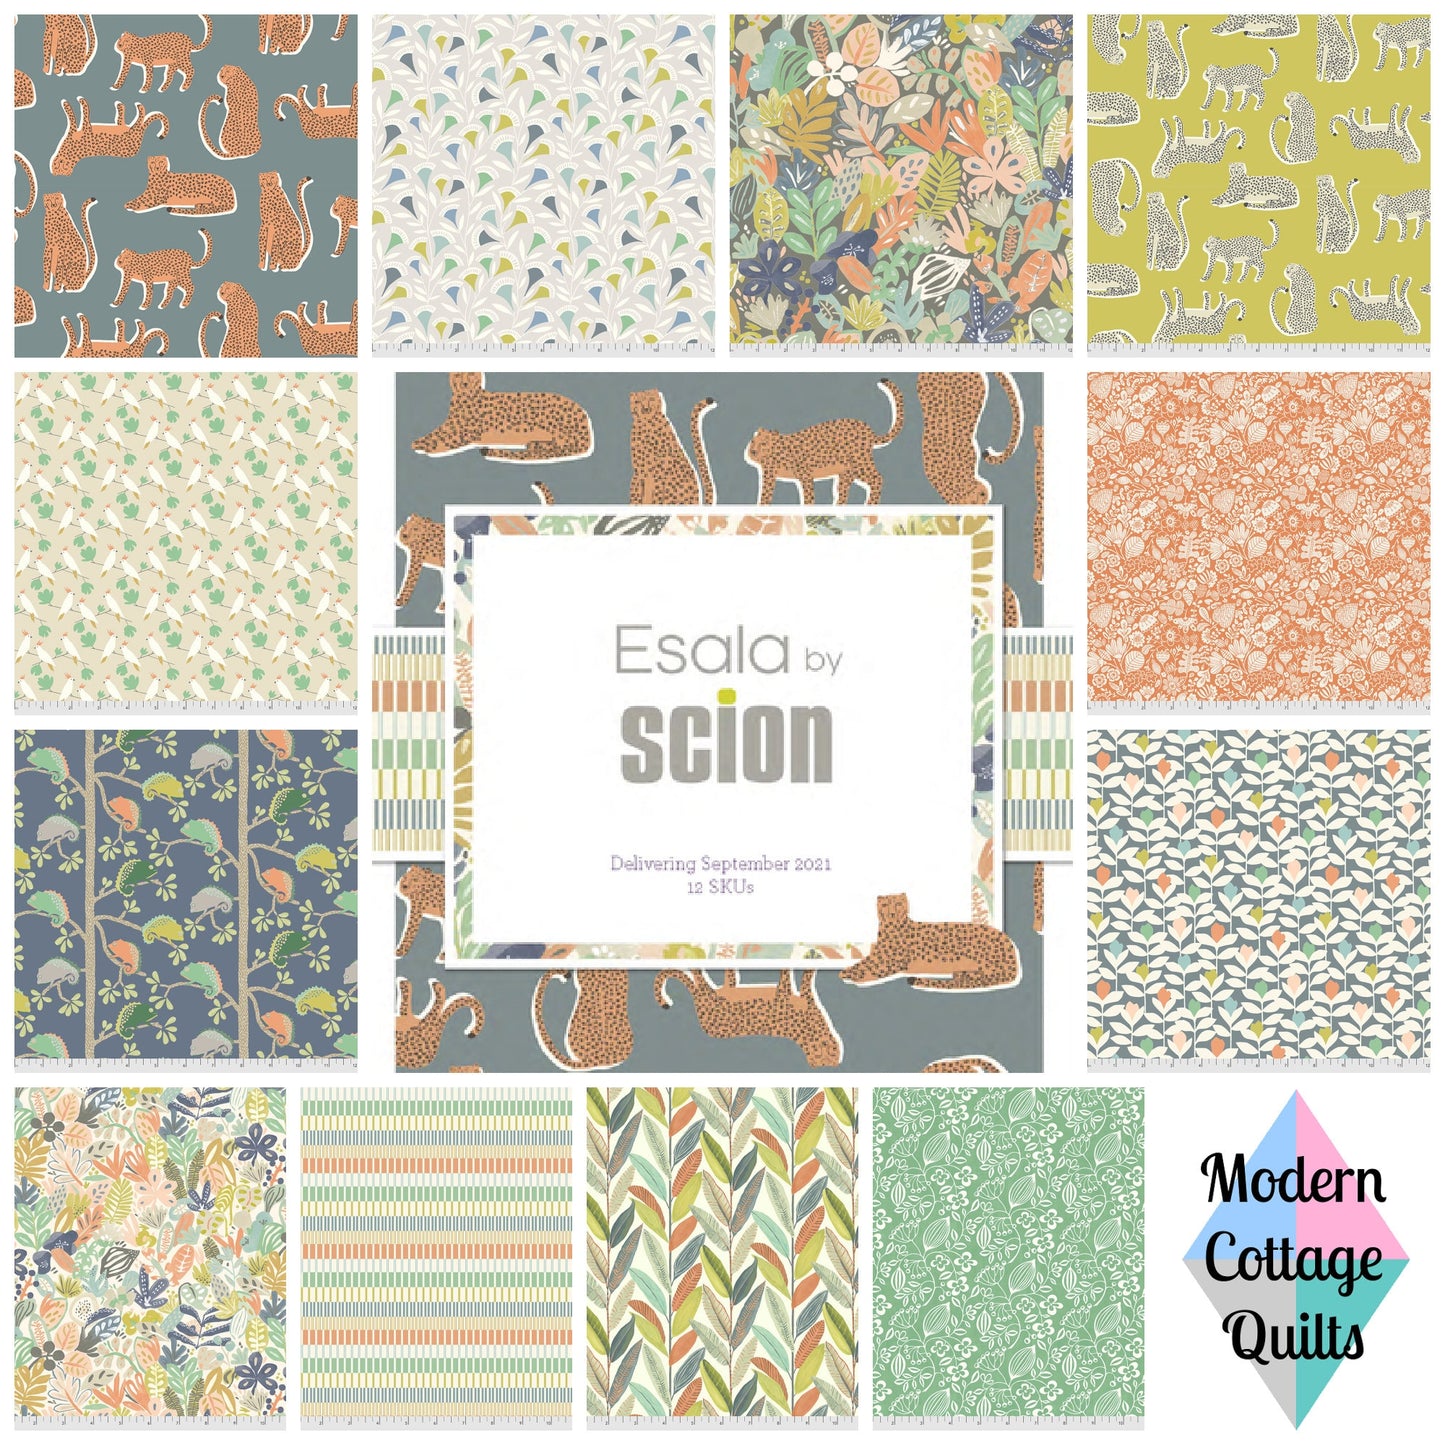 Esala Collection Lionel Print - Denim Colored Quilters Cotton by Scion for FreeSpirit Fabrics